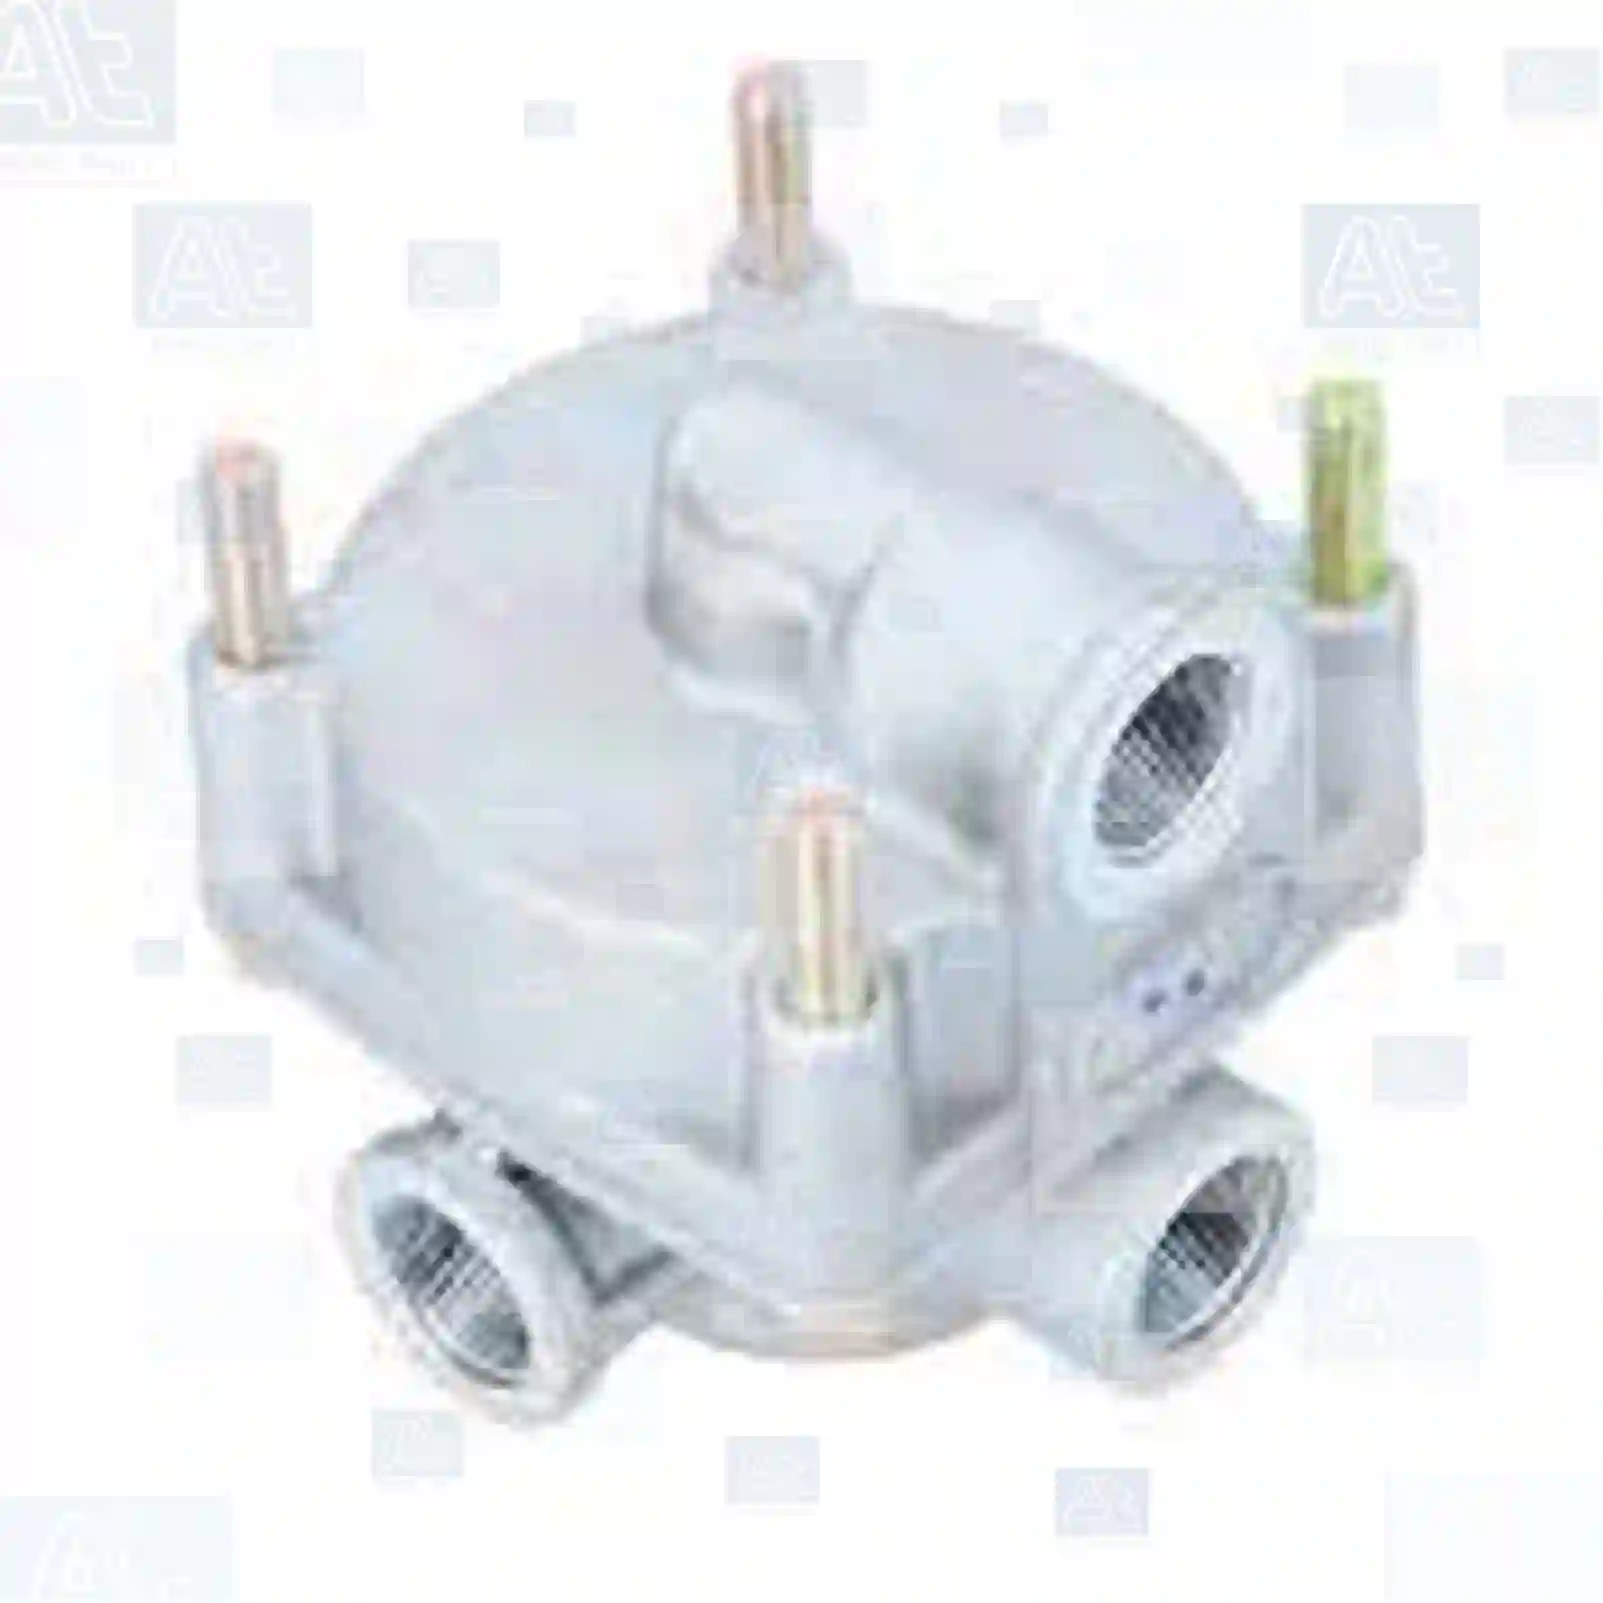 Relay valve, 77713711, 605310600, 0522545, 0522545R, 1505145, 522545, 522545A, 522545R, 02077426, 01278511, 02444906, 04625756, 42015698, 5000012541, 71005249, A2131600, CF3516517, 201248, 01278511, 02444906, 04625756, 1278511, 2444906, 42015698, 42020573, 4625756, 5000012541, 61578004, 71005249, 77390, 500945379, 945379, 5029280, 502928001, 502928014, 81436096008, 81991643679, 90810114360, 90810114390, 0004296544, 0014293044, 0034295244, 110242100, AIF0008, 5000012541, 5001829194, 5021170451, 1935623, 8283421000, 82834210000, 348909, 384909 ||  77713711 At Spare Part | Engine, Accelerator Pedal, Camshaft, Connecting Rod, Crankcase, Crankshaft, Cylinder Head, Engine Suspension Mountings, Exhaust Manifold, Exhaust Gas Recirculation, Filter Kits, Flywheel Housing, General Overhaul Kits, Engine, Intake Manifold, Oil Cleaner, Oil Cooler, Oil Filter, Oil Pump, Oil Sump, Piston & Liner, Sensor & Switch, Timing Case, Turbocharger, Cooling System, Belt Tensioner, Coolant Filter, Coolant Pipe, Corrosion Prevention Agent, Drive, Expansion Tank, Fan, Intercooler, Monitors & Gauges, Radiator, Thermostat, V-Belt / Timing belt, Water Pump, Fuel System, Electronical Injector Unit, Feed Pump, Fuel Filter, cpl., Fuel Gauge Sender,  Fuel Line, Fuel Pump, Fuel Tank, Injection Line Kit, Injection Pump, Exhaust System, Clutch & Pedal, Gearbox, Propeller Shaft, Axles, Brake System, Hubs & Wheels, Suspension, Leaf Spring, Universal Parts / Accessories, Steering, Electrical System, Cabin Relay valve, 77713711, 605310600, 0522545, 0522545R, 1505145, 522545, 522545A, 522545R, 02077426, 01278511, 02444906, 04625756, 42015698, 5000012541, 71005249, A2131600, CF3516517, 201248, 01278511, 02444906, 04625756, 1278511, 2444906, 42015698, 42020573, 4625756, 5000012541, 61578004, 71005249, 77390, 500945379, 945379, 5029280, 502928001, 502928014, 81436096008, 81991643679, 90810114360, 90810114390, 0004296544, 0014293044, 0034295244, 110242100, AIF0008, 5000012541, 5001829194, 5021170451, 1935623, 8283421000, 82834210000, 348909, 384909 ||  77713711 At Spare Part | Engine, Accelerator Pedal, Camshaft, Connecting Rod, Crankcase, Crankshaft, Cylinder Head, Engine Suspension Mountings, Exhaust Manifold, Exhaust Gas Recirculation, Filter Kits, Flywheel Housing, General Overhaul Kits, Engine, Intake Manifold, Oil Cleaner, Oil Cooler, Oil Filter, Oil Pump, Oil Sump, Piston & Liner, Sensor & Switch, Timing Case, Turbocharger, Cooling System, Belt Tensioner, Coolant Filter, Coolant Pipe, Corrosion Prevention Agent, Drive, Expansion Tank, Fan, Intercooler, Monitors & Gauges, Radiator, Thermostat, V-Belt / Timing belt, Water Pump, Fuel System, Electronical Injector Unit, Feed Pump, Fuel Filter, cpl., Fuel Gauge Sender,  Fuel Line, Fuel Pump, Fuel Tank, Injection Line Kit, Injection Pump, Exhaust System, Clutch & Pedal, Gearbox, Propeller Shaft, Axles, Brake System, Hubs & Wheels, Suspension, Leaf Spring, Universal Parts / Accessories, Steering, Electrical System, Cabin